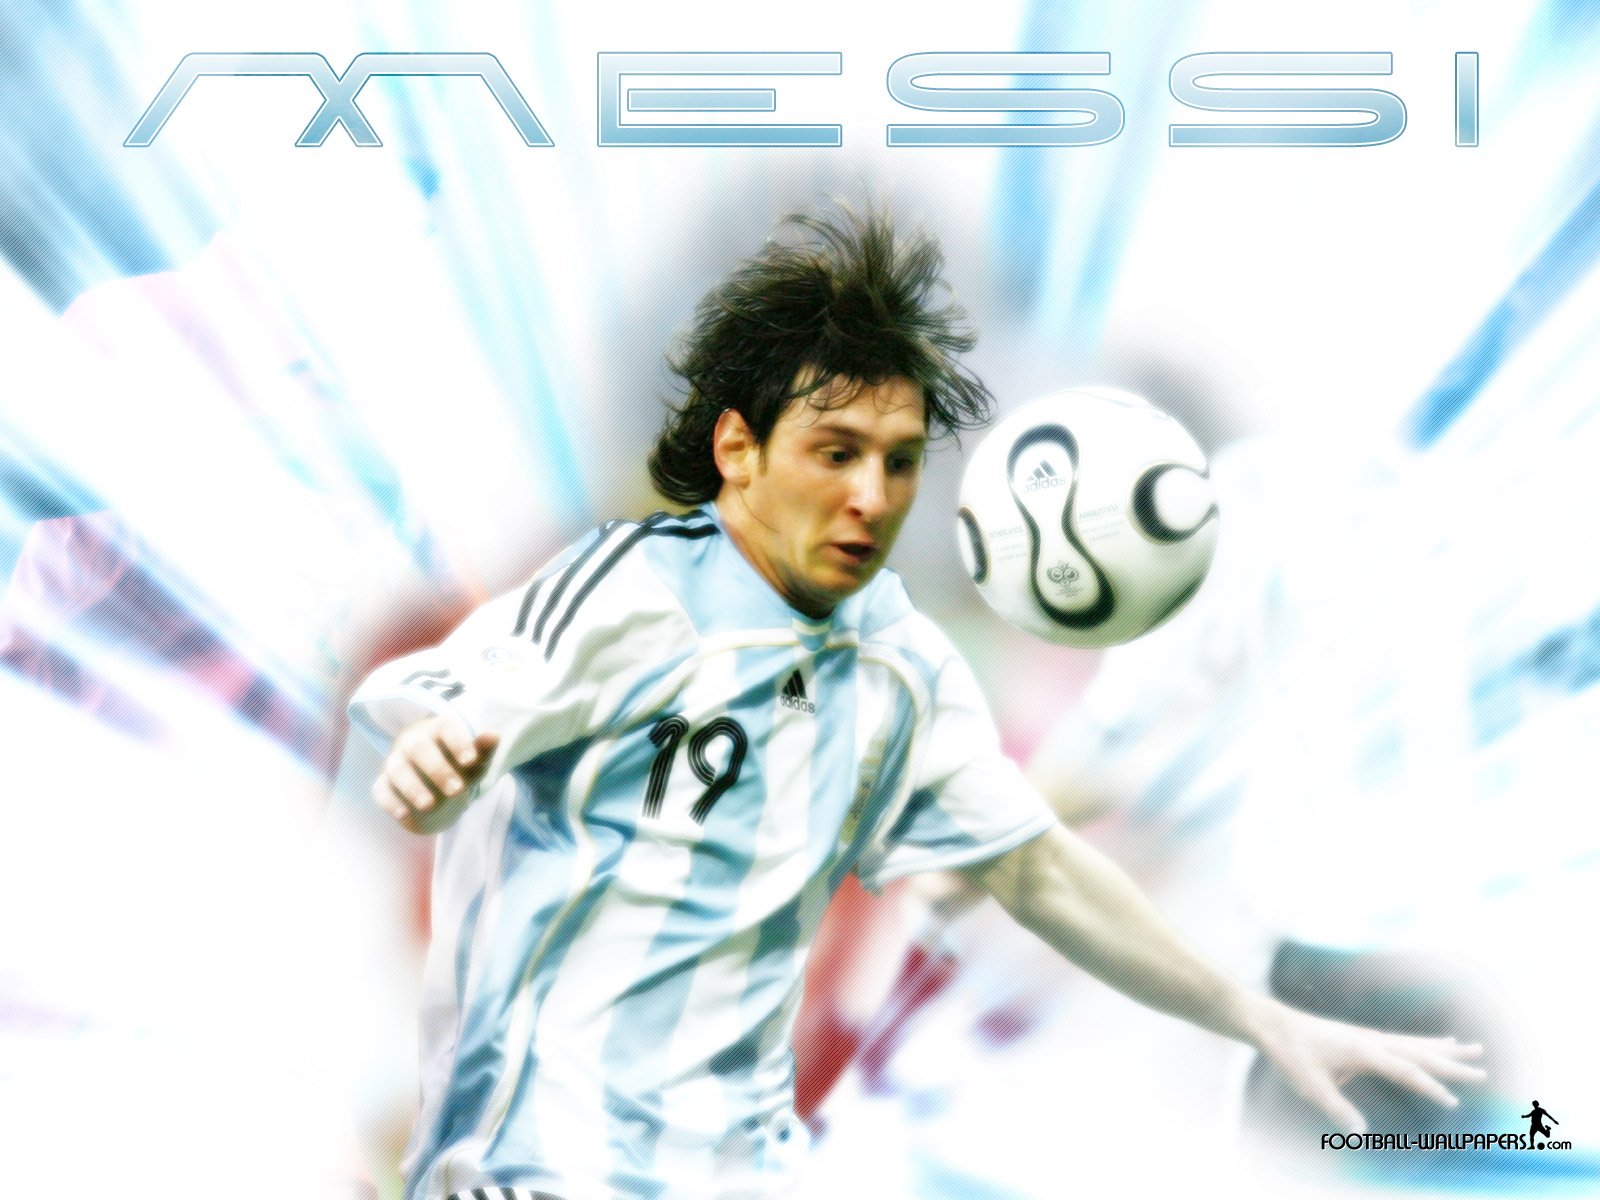 Lionel Messi Wallpaper 1 Football Wallpapers and Videos 1600x1200